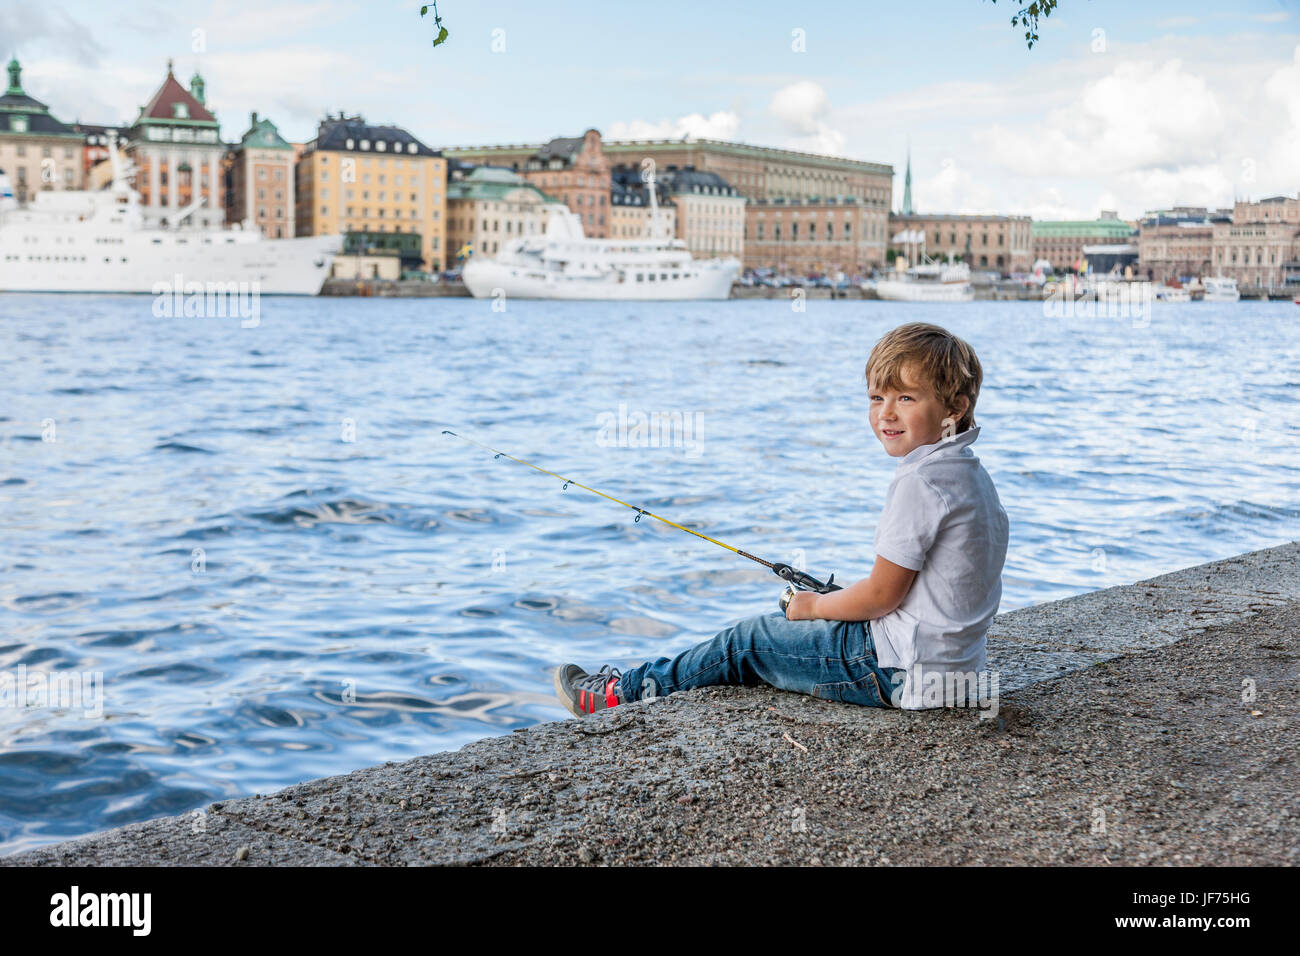 Portrait of boy fishing in river, old town in background Stock Photo